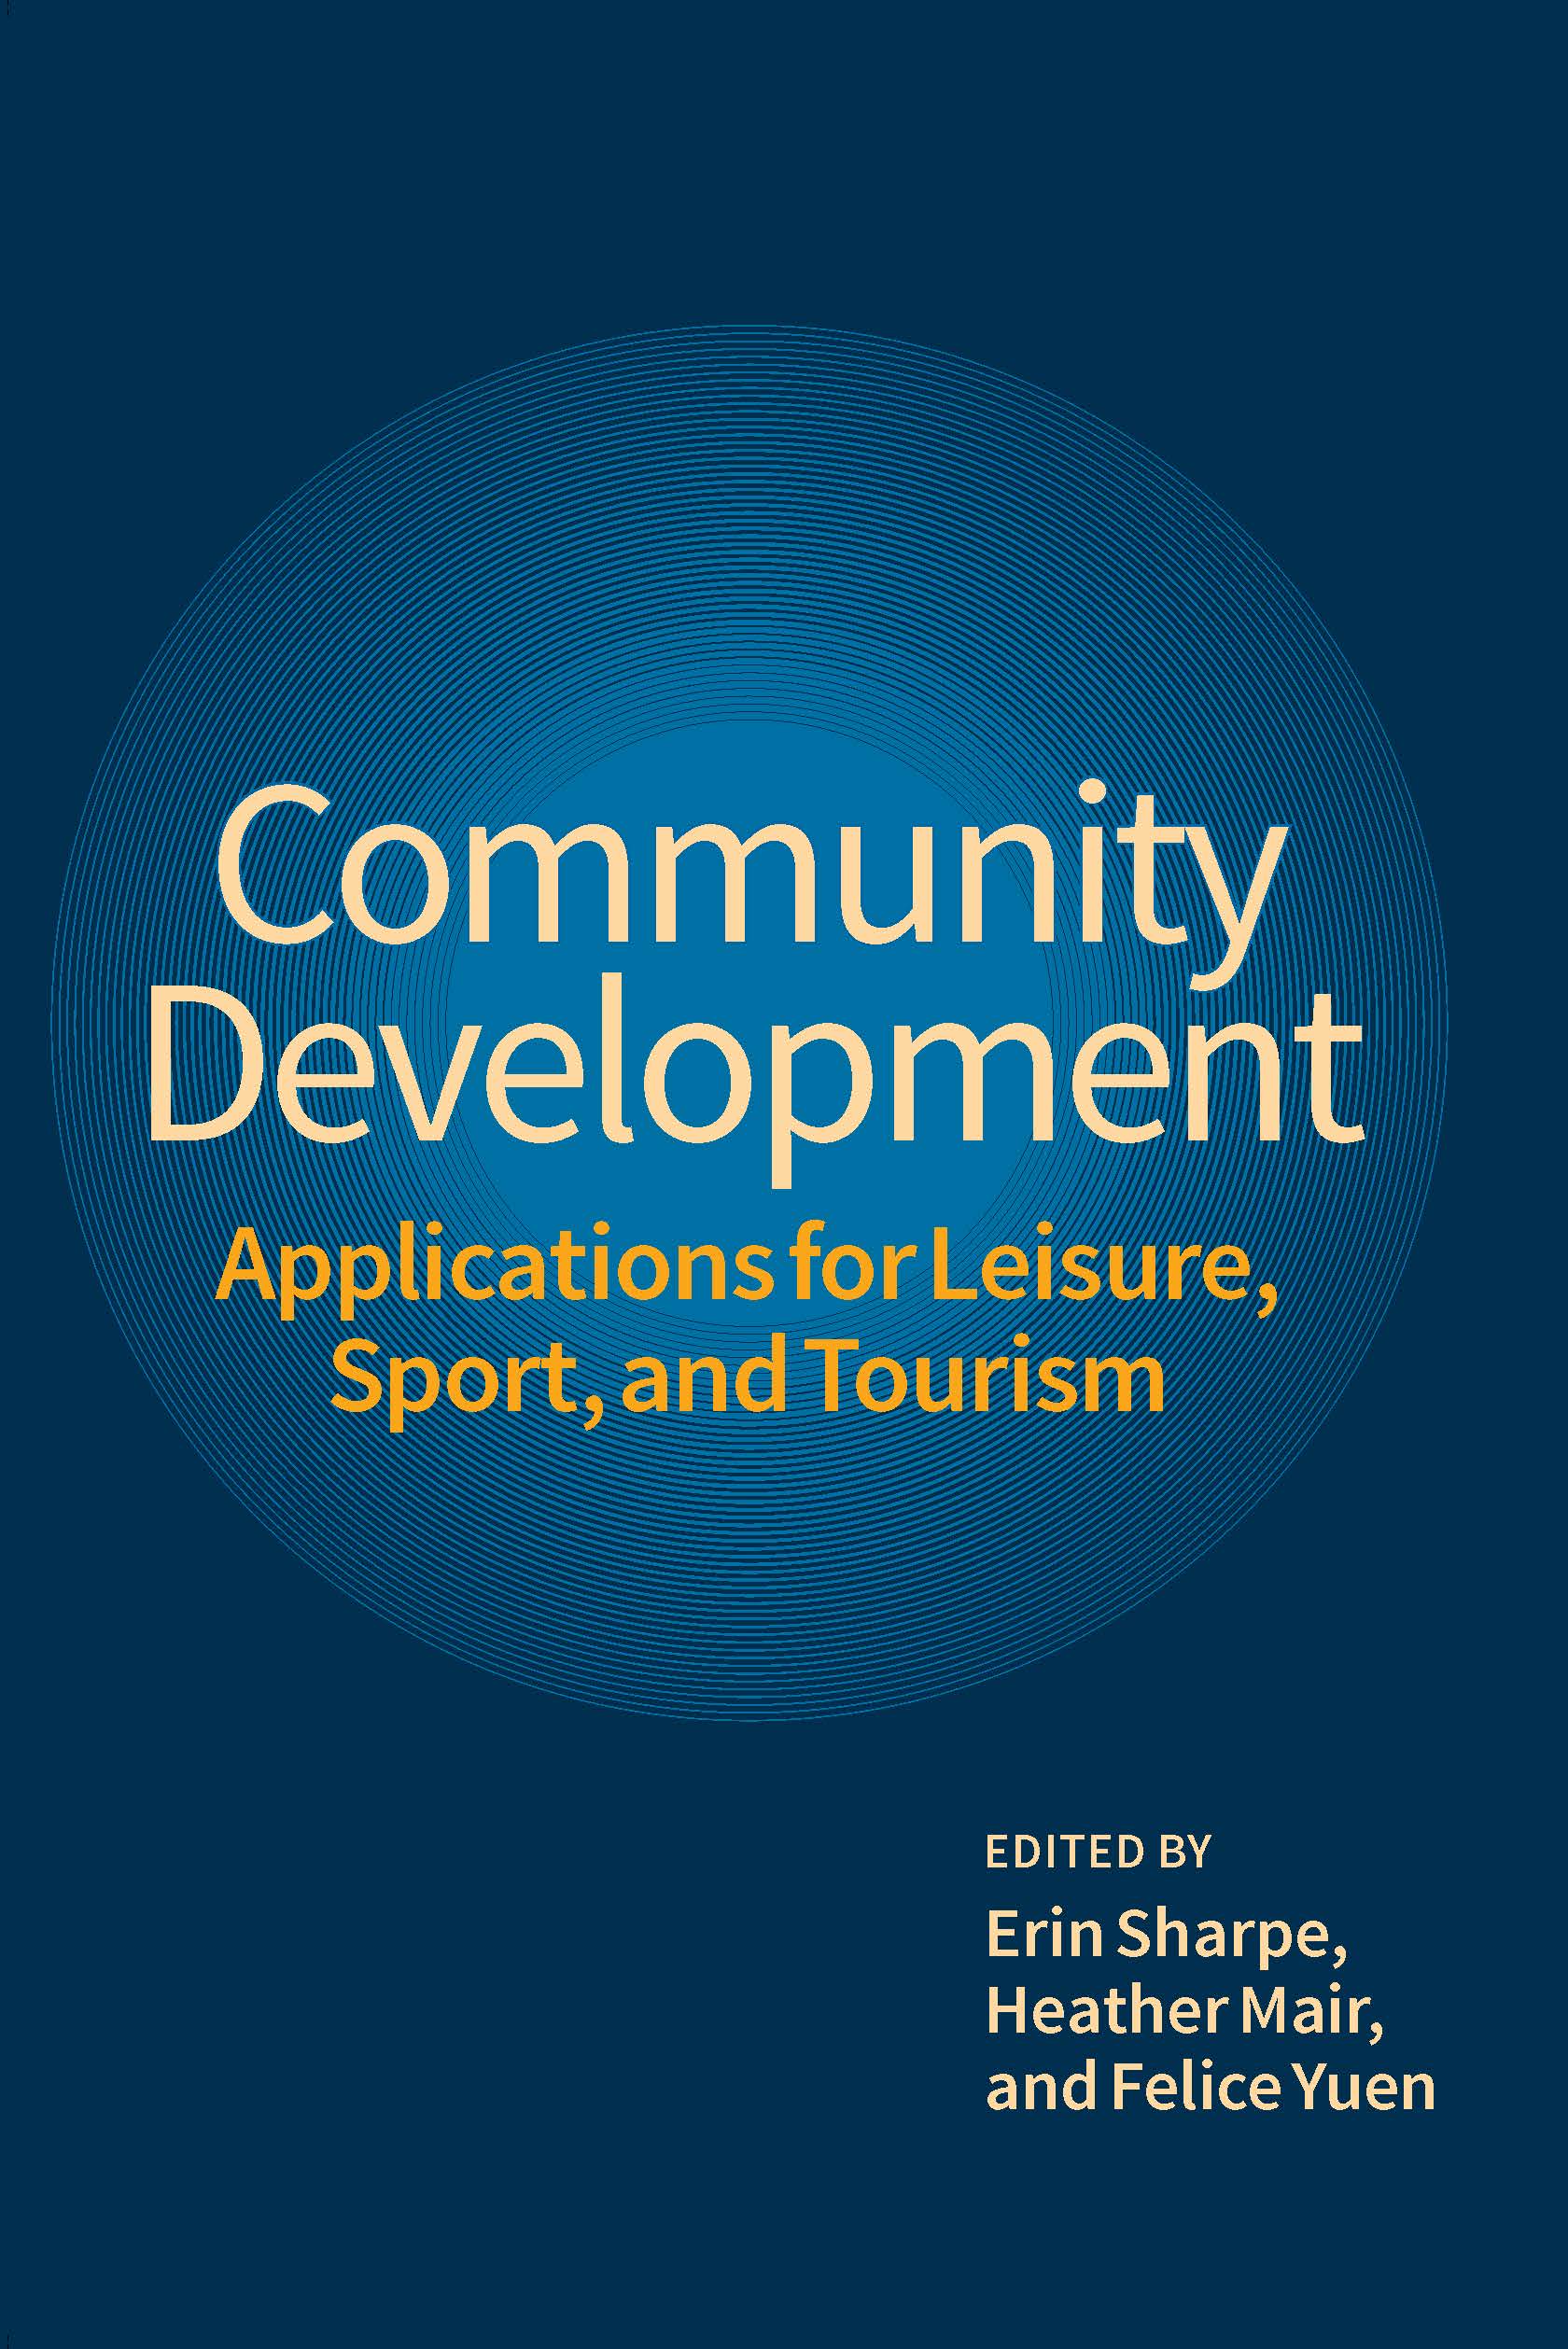 Community Development Applications for Leisure, Sport, and Tourism